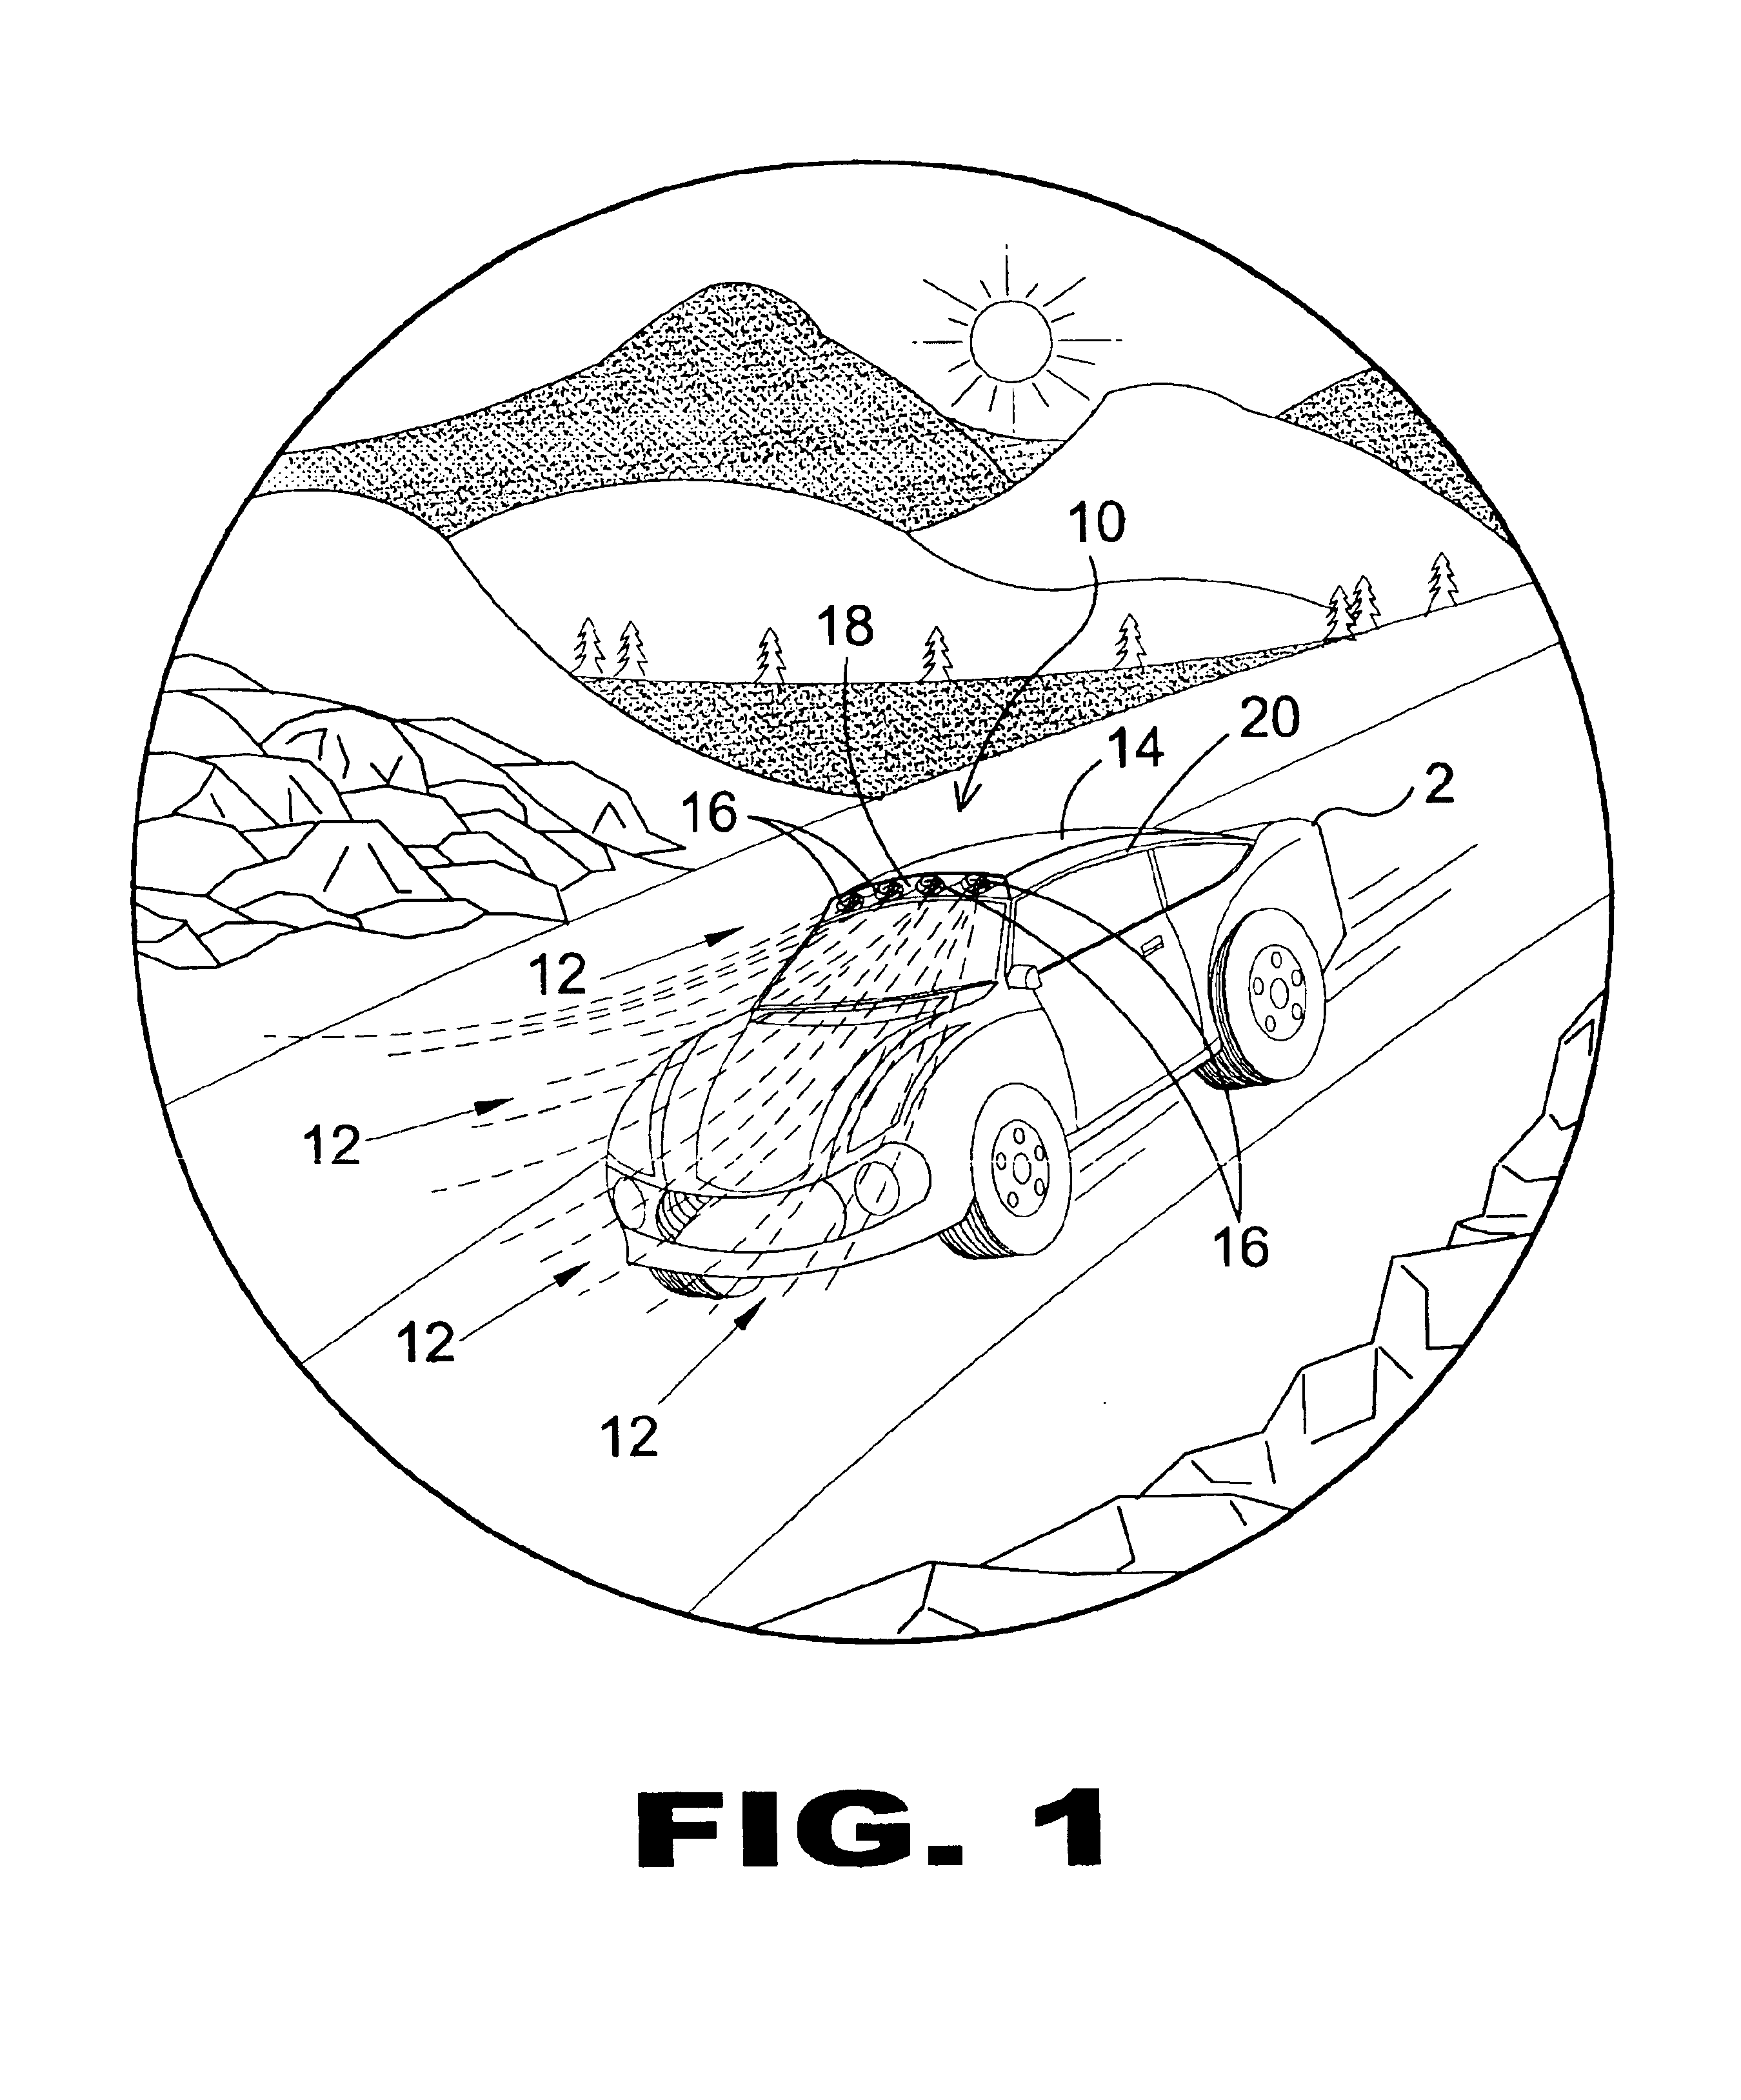 Portable wind power apparatus for electric vehicles